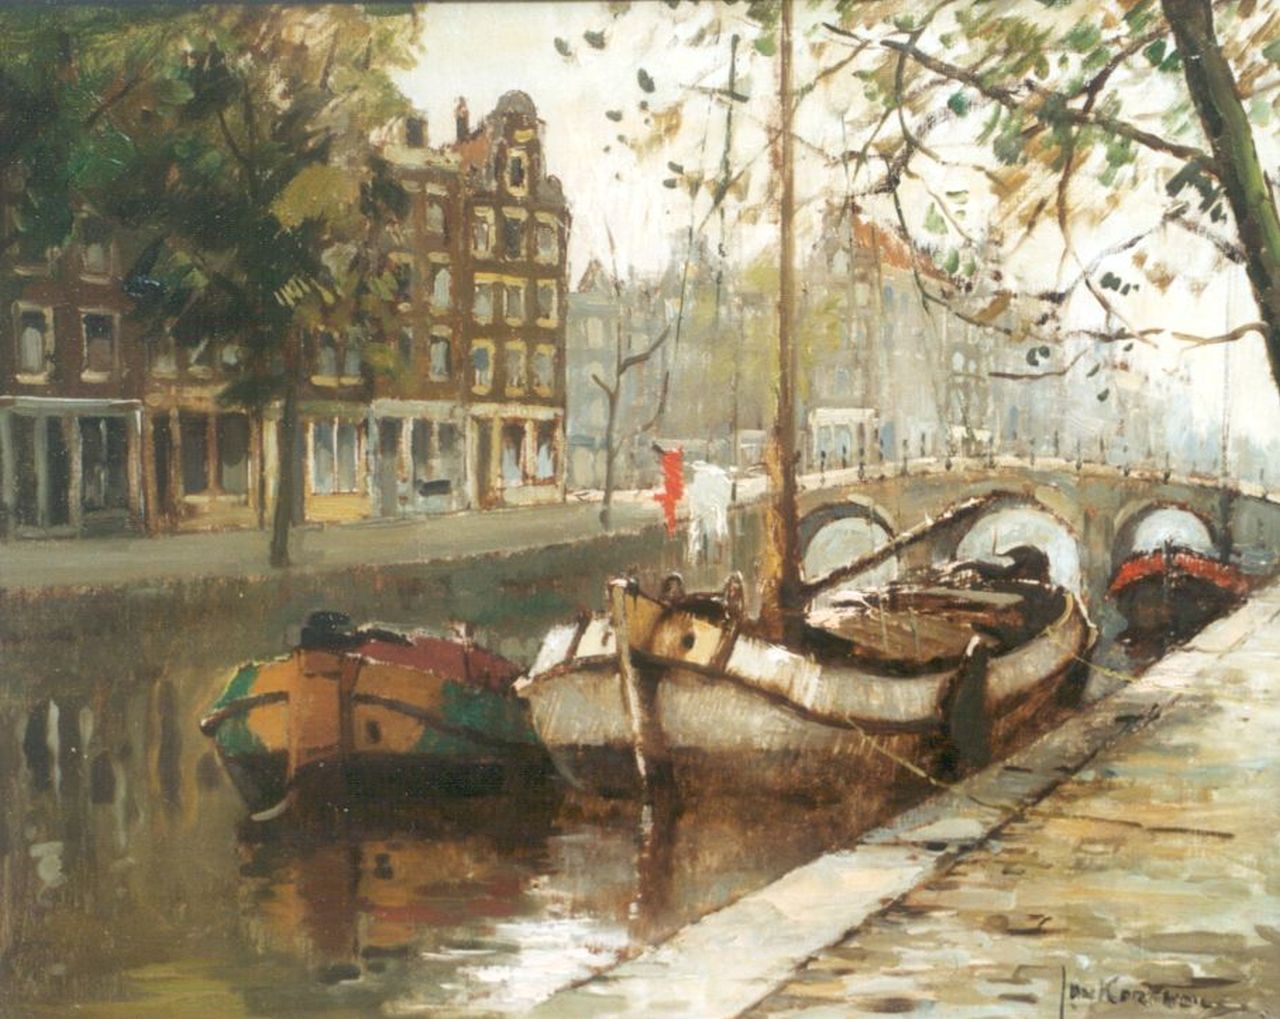 Korthals J.  | Johannes 'Jan' Korthals, Moored boats in a canal, Amsterdam, oil on canvas 40.3 x 49.9 cm, signed l.r.